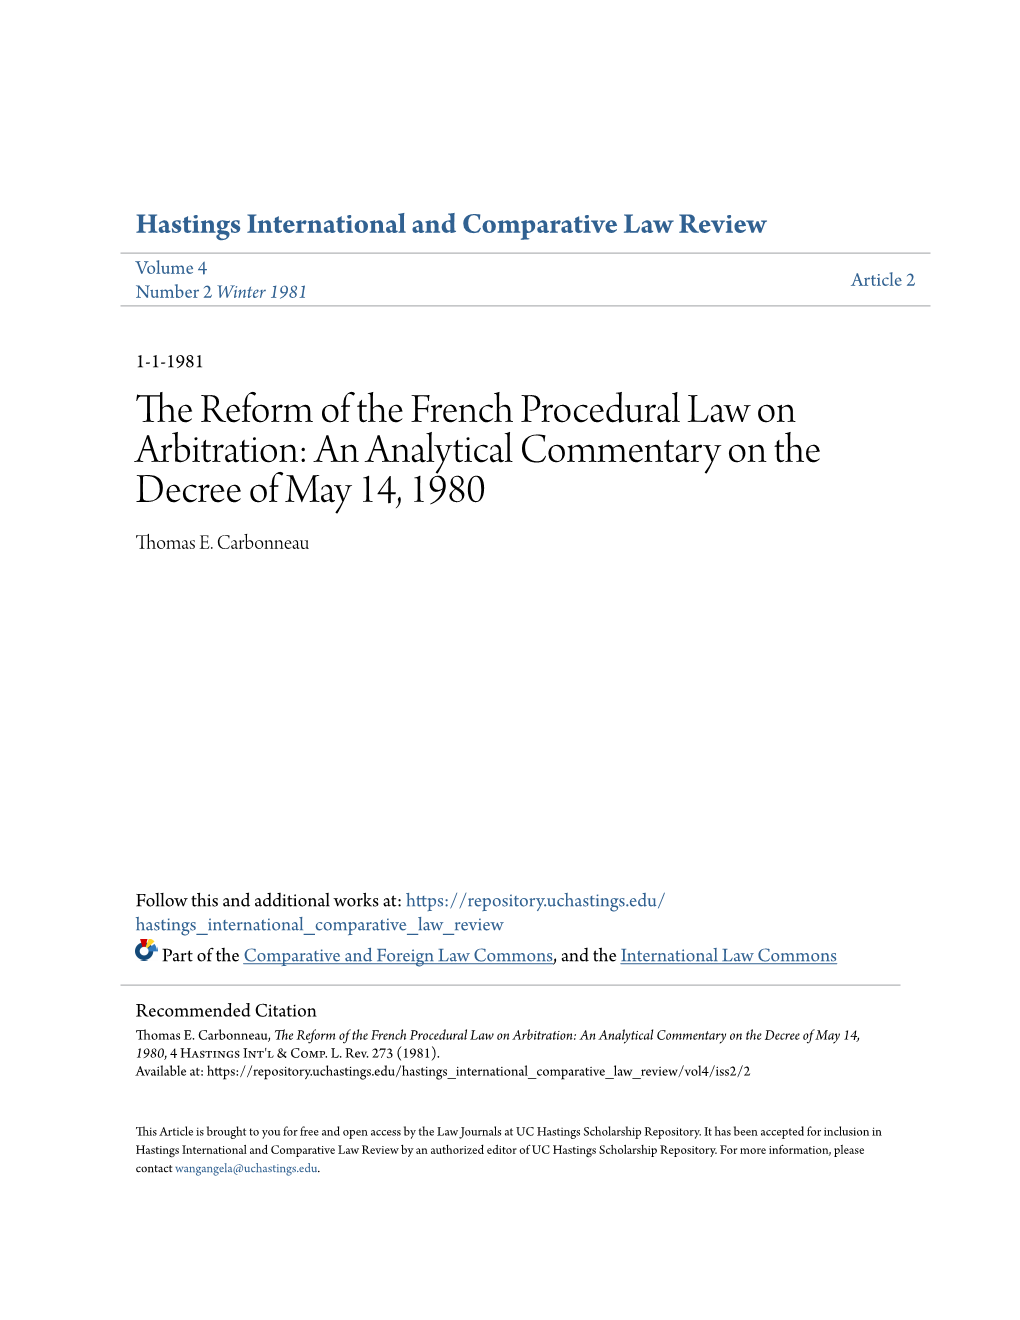 The Reform of the French Procedural Law on Arbitration: an Analytical Commentary on the Decree of May 14, 1980 Thomas E